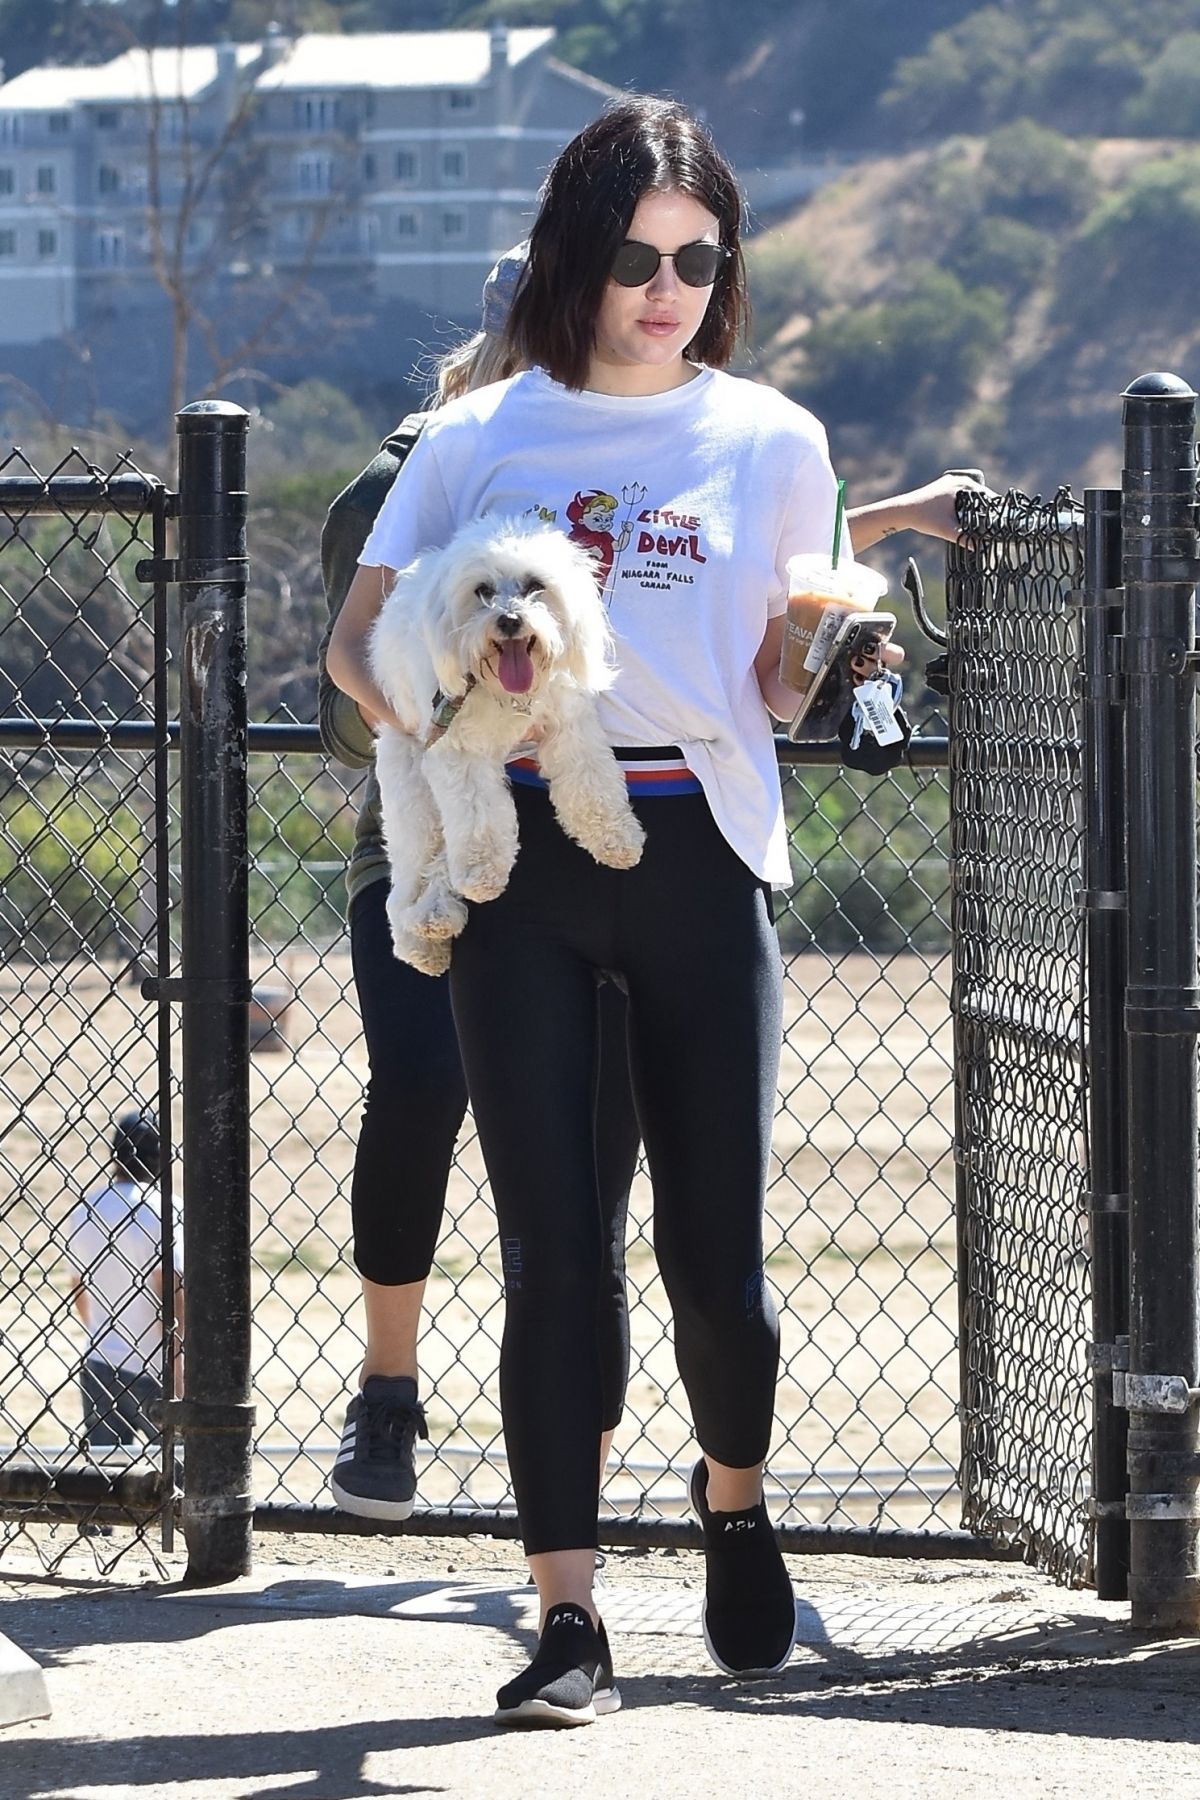 LUCY HALE at a Dog Park in Los Angeles 09/16/2018 – HawtCelebs